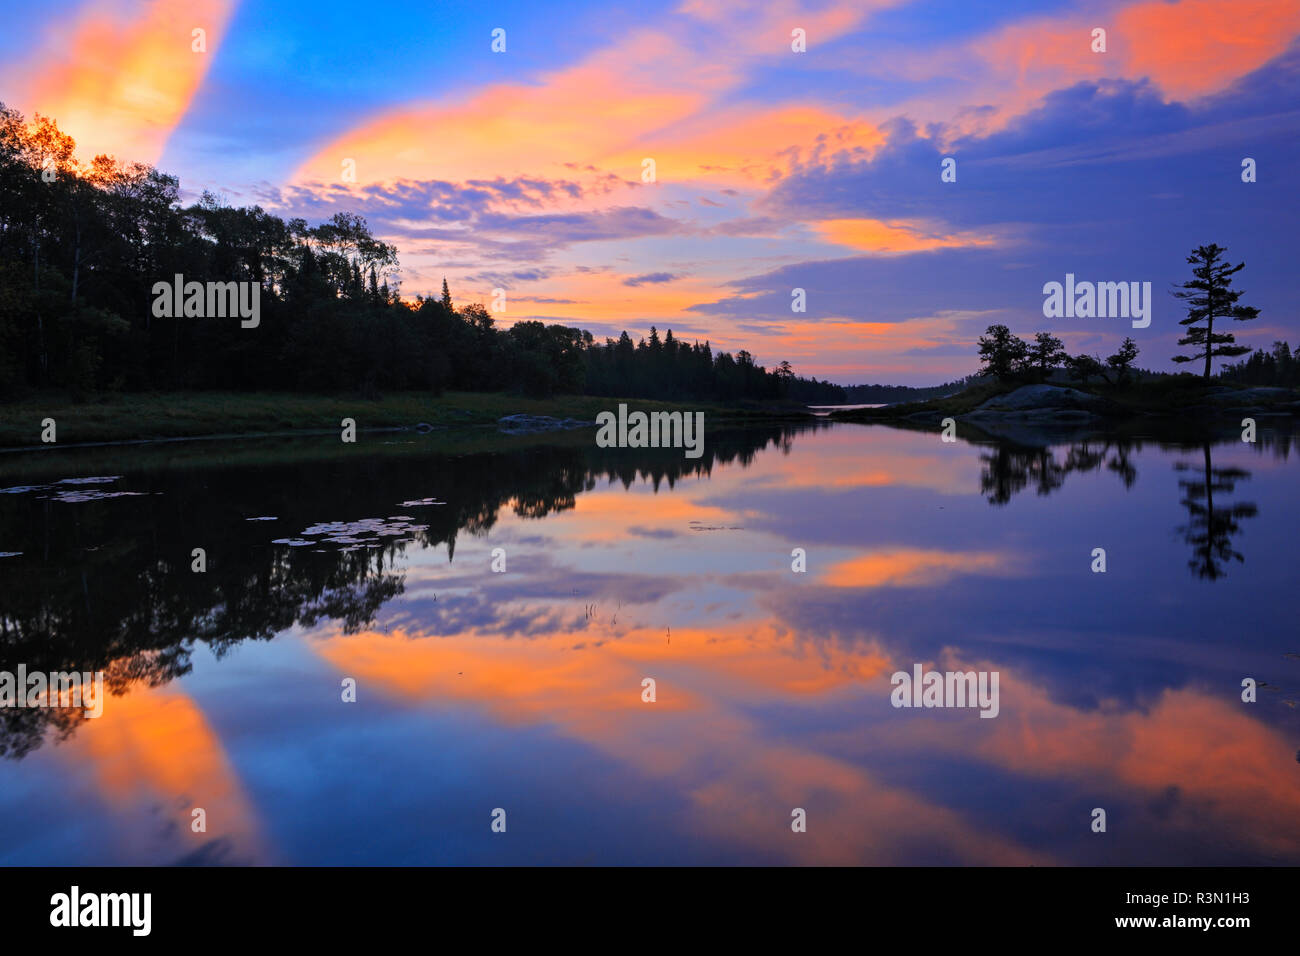 Canada, Ontario, Kenora. Reflections in Middle Lake at sunrise. Stock Photo